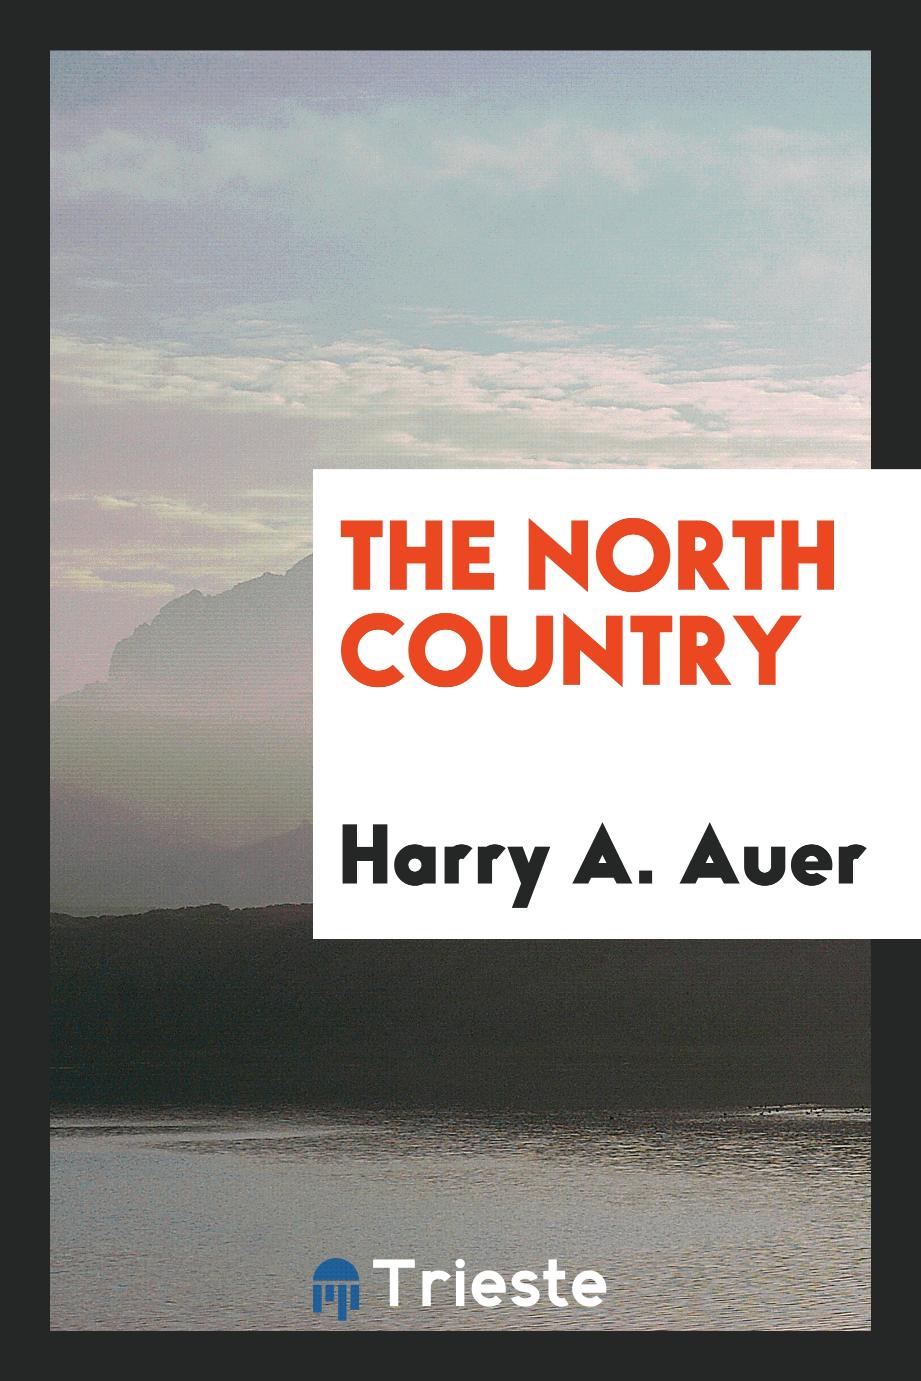 The North country